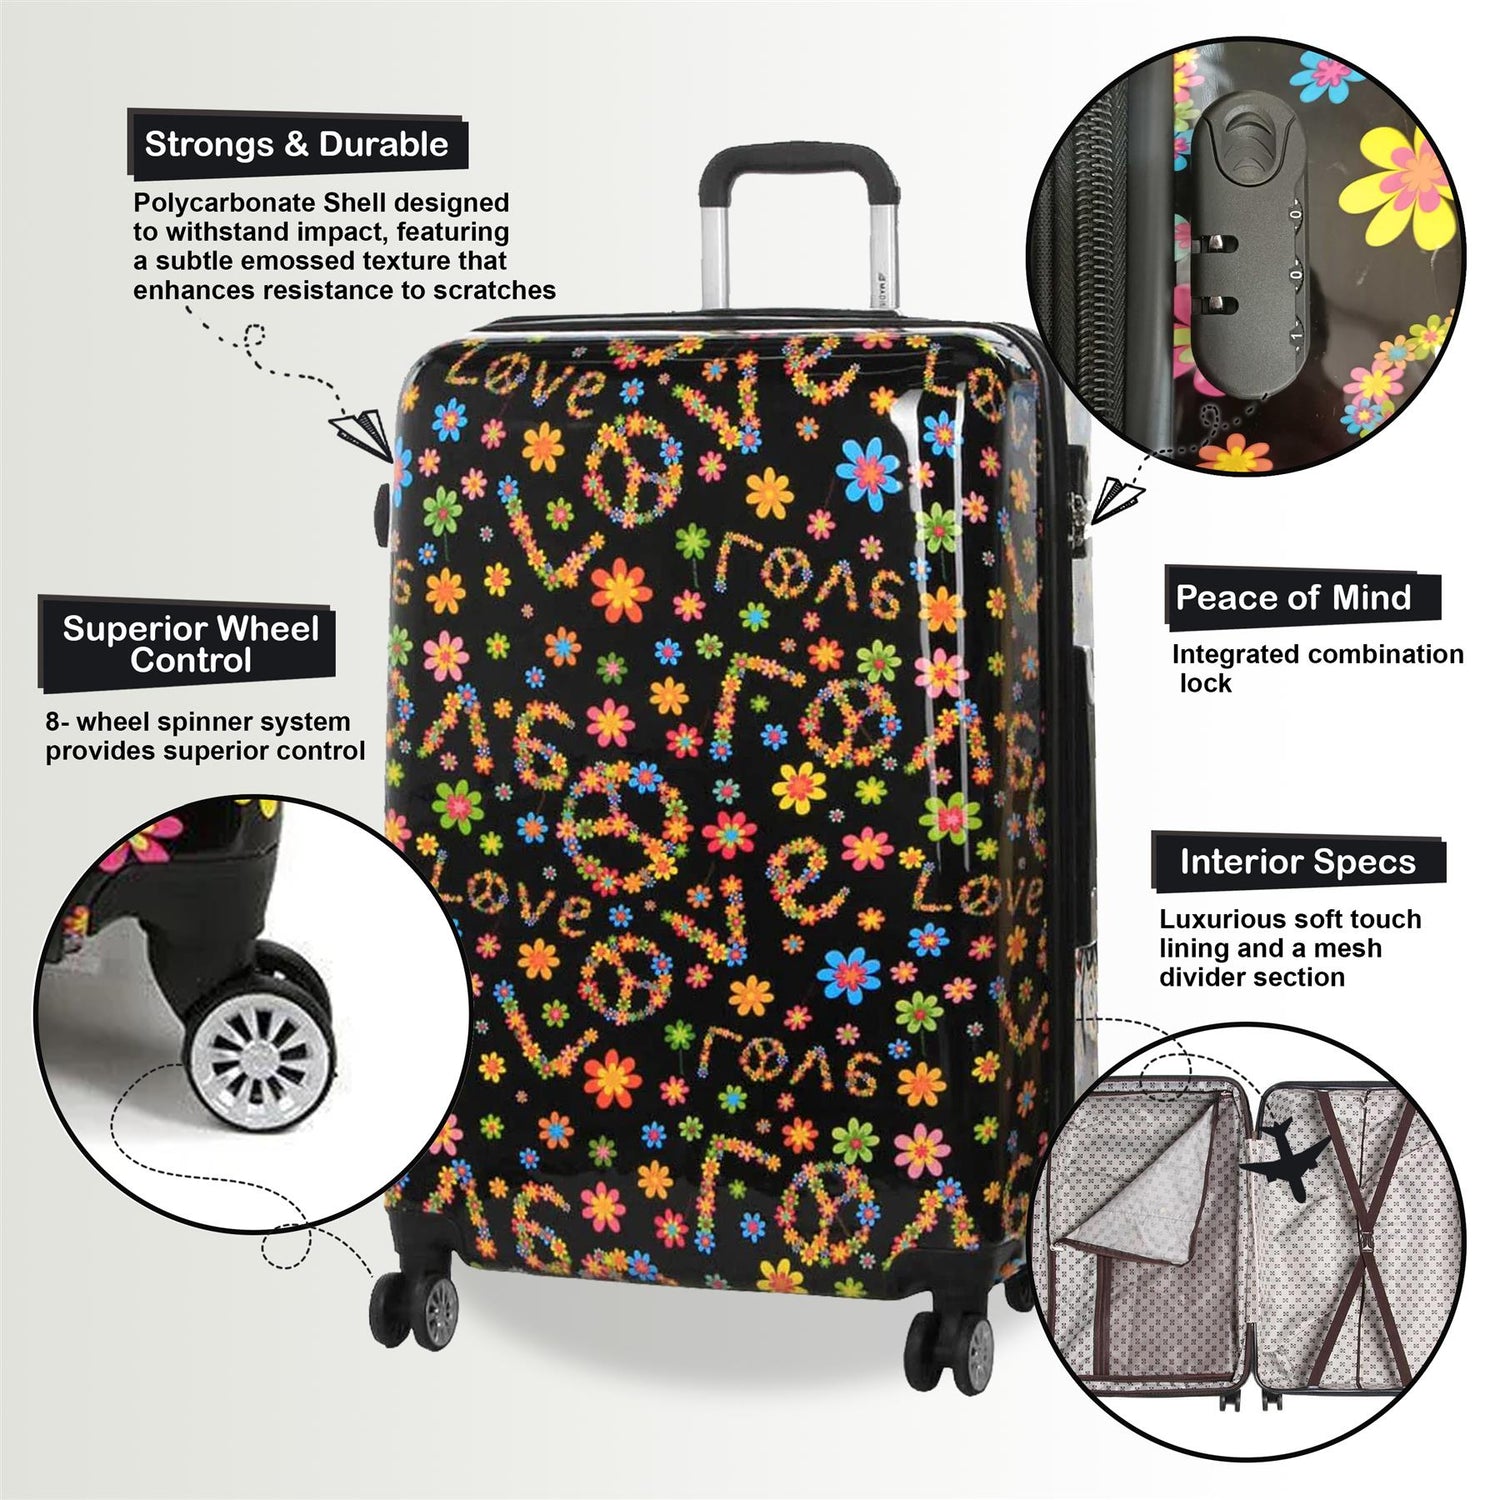 Clanton Large Hard Shell Suitcase in Love